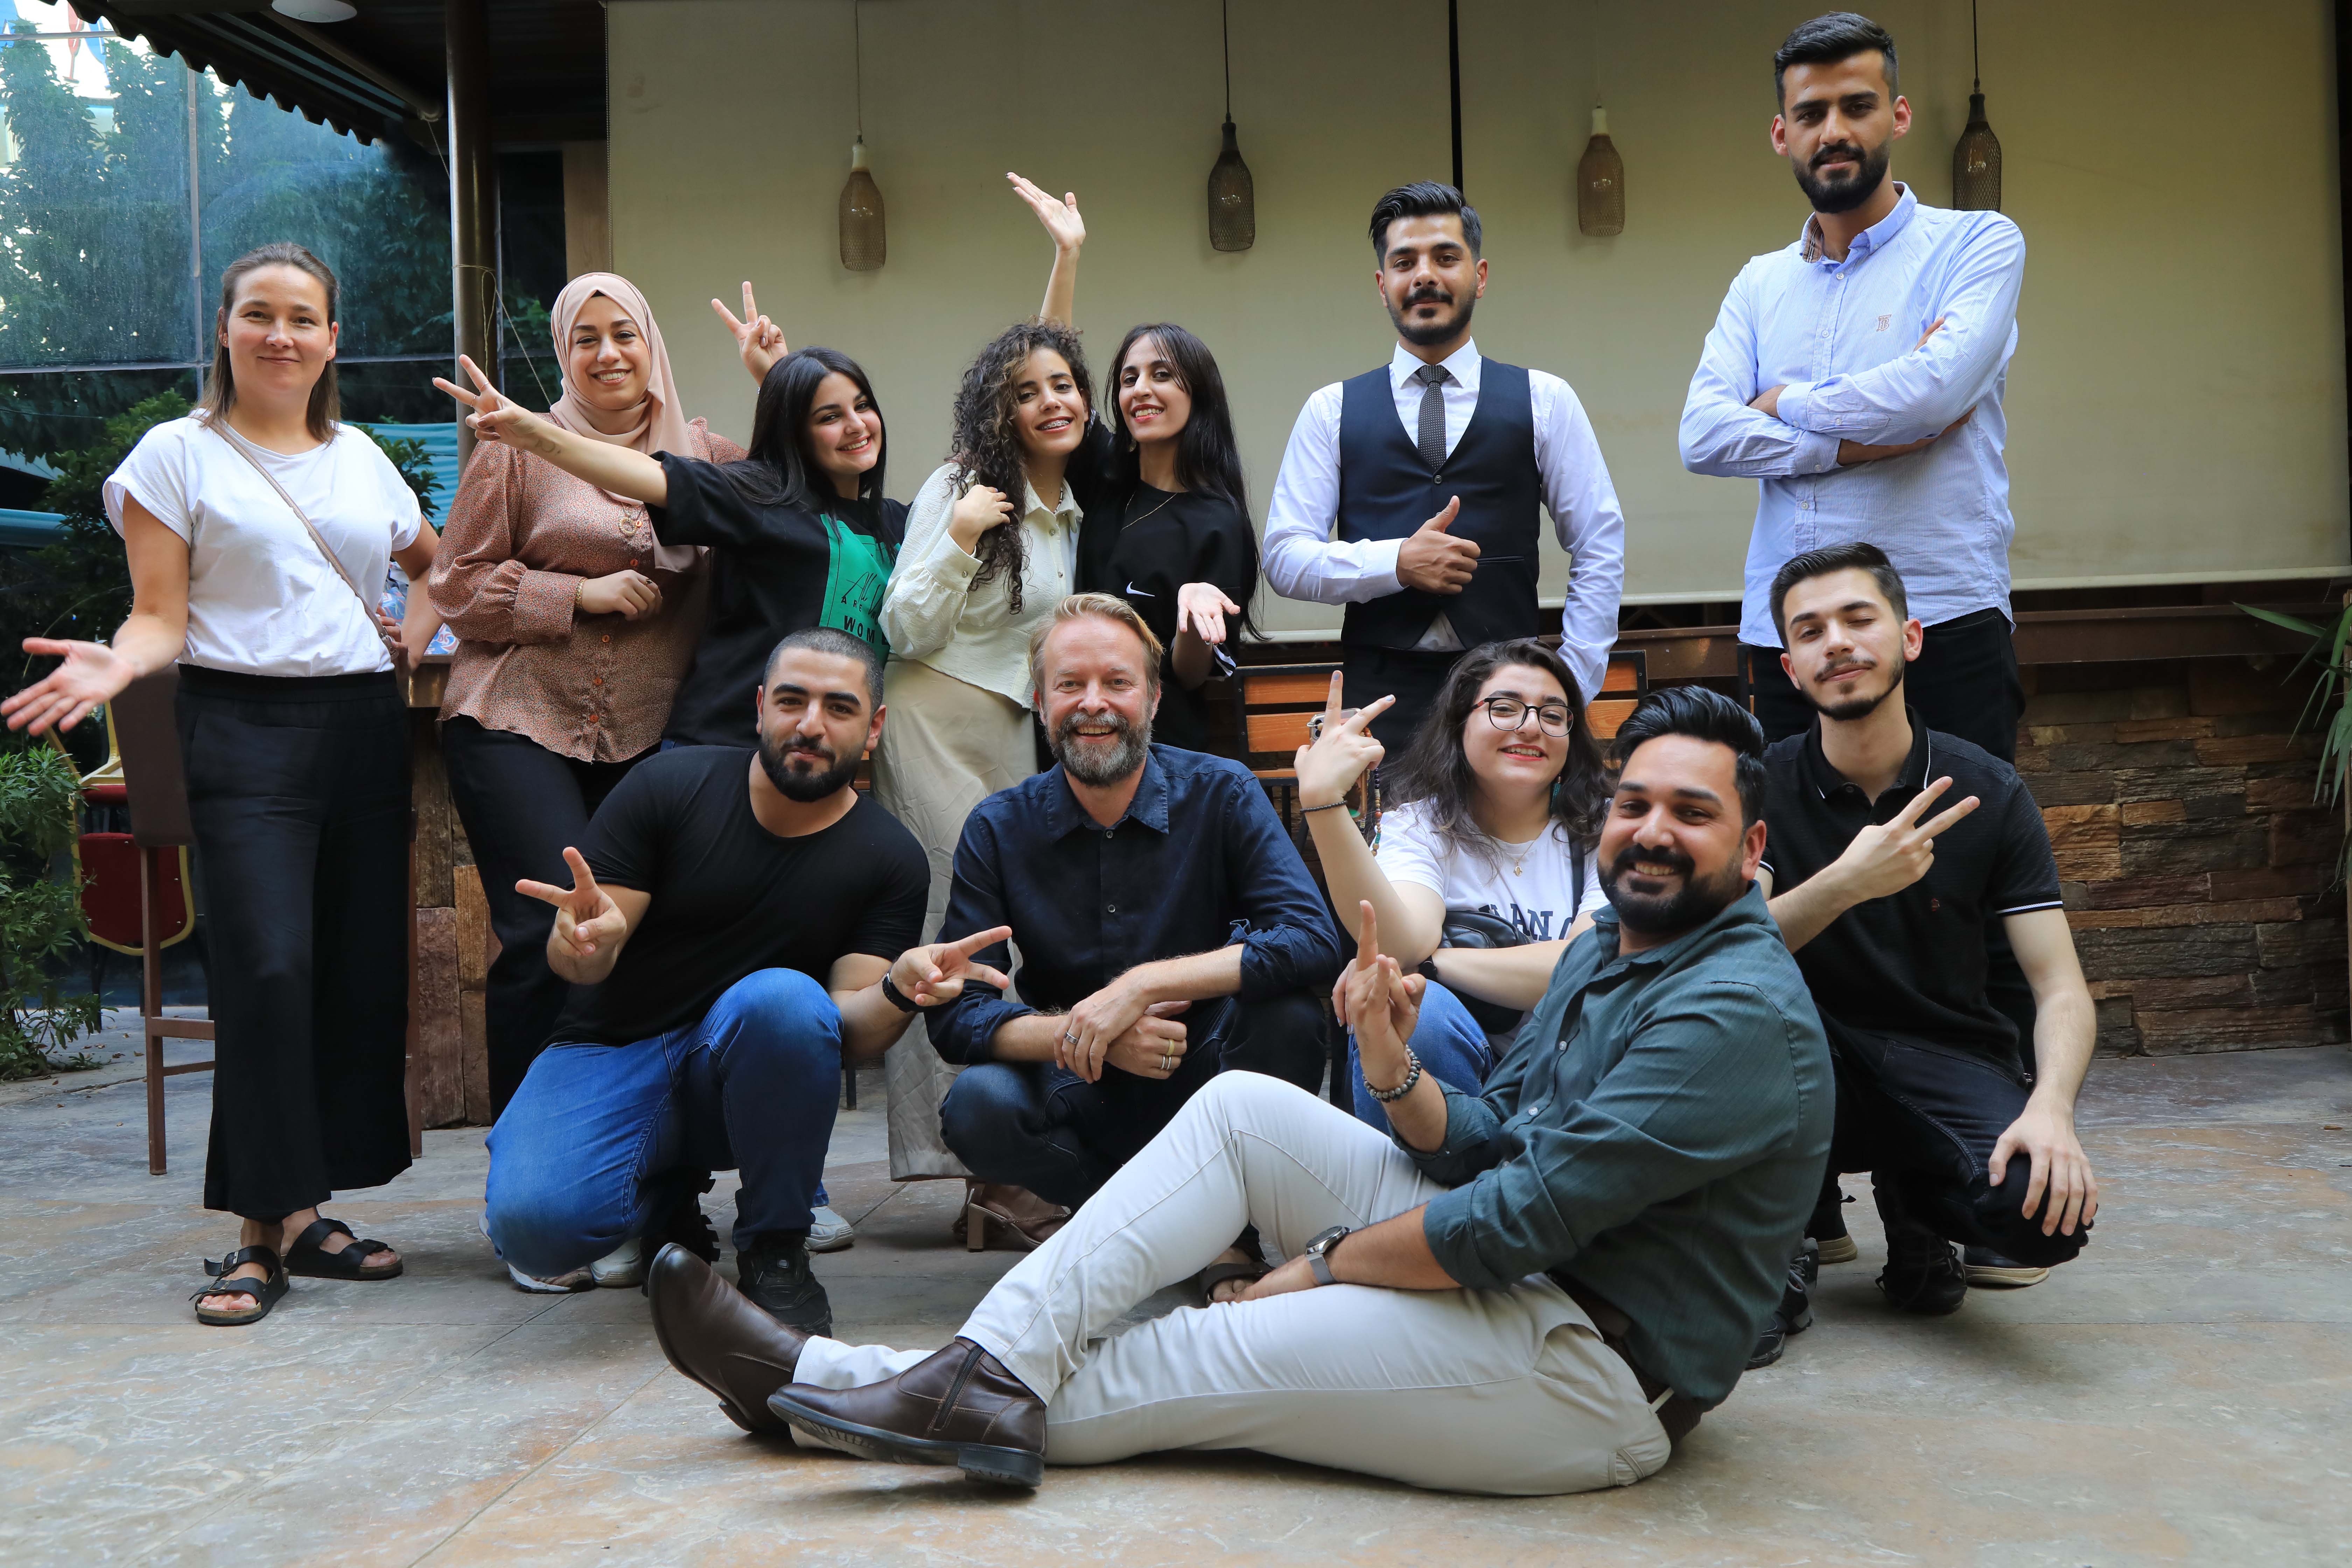 Ten men and women were selected from among more than 1,000 applications from across Iraq to participate in the young people’s workshop in Erbil. Photograph: Tech4Peace